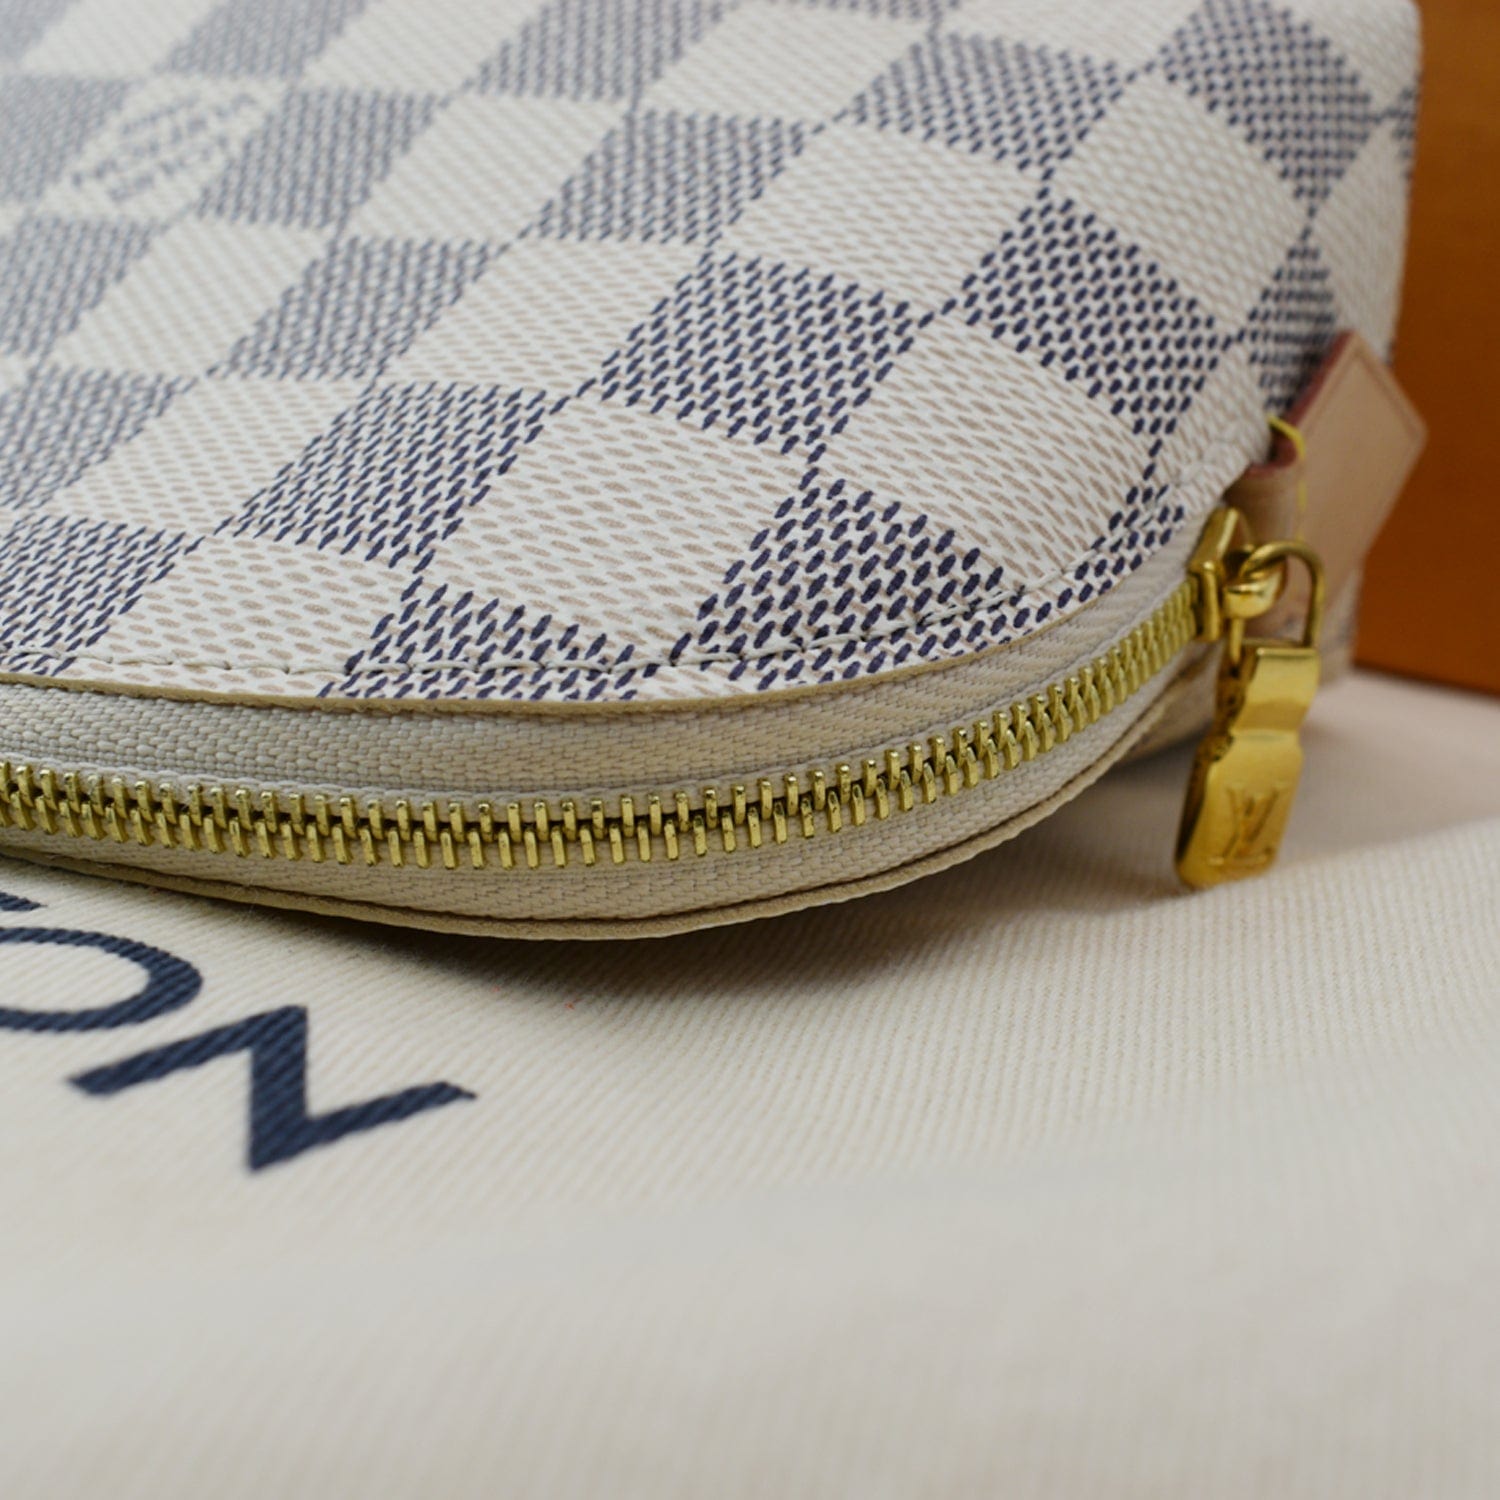 Louis Vuitton Pouch White - $600 (40% Off Retail) - From Ocean